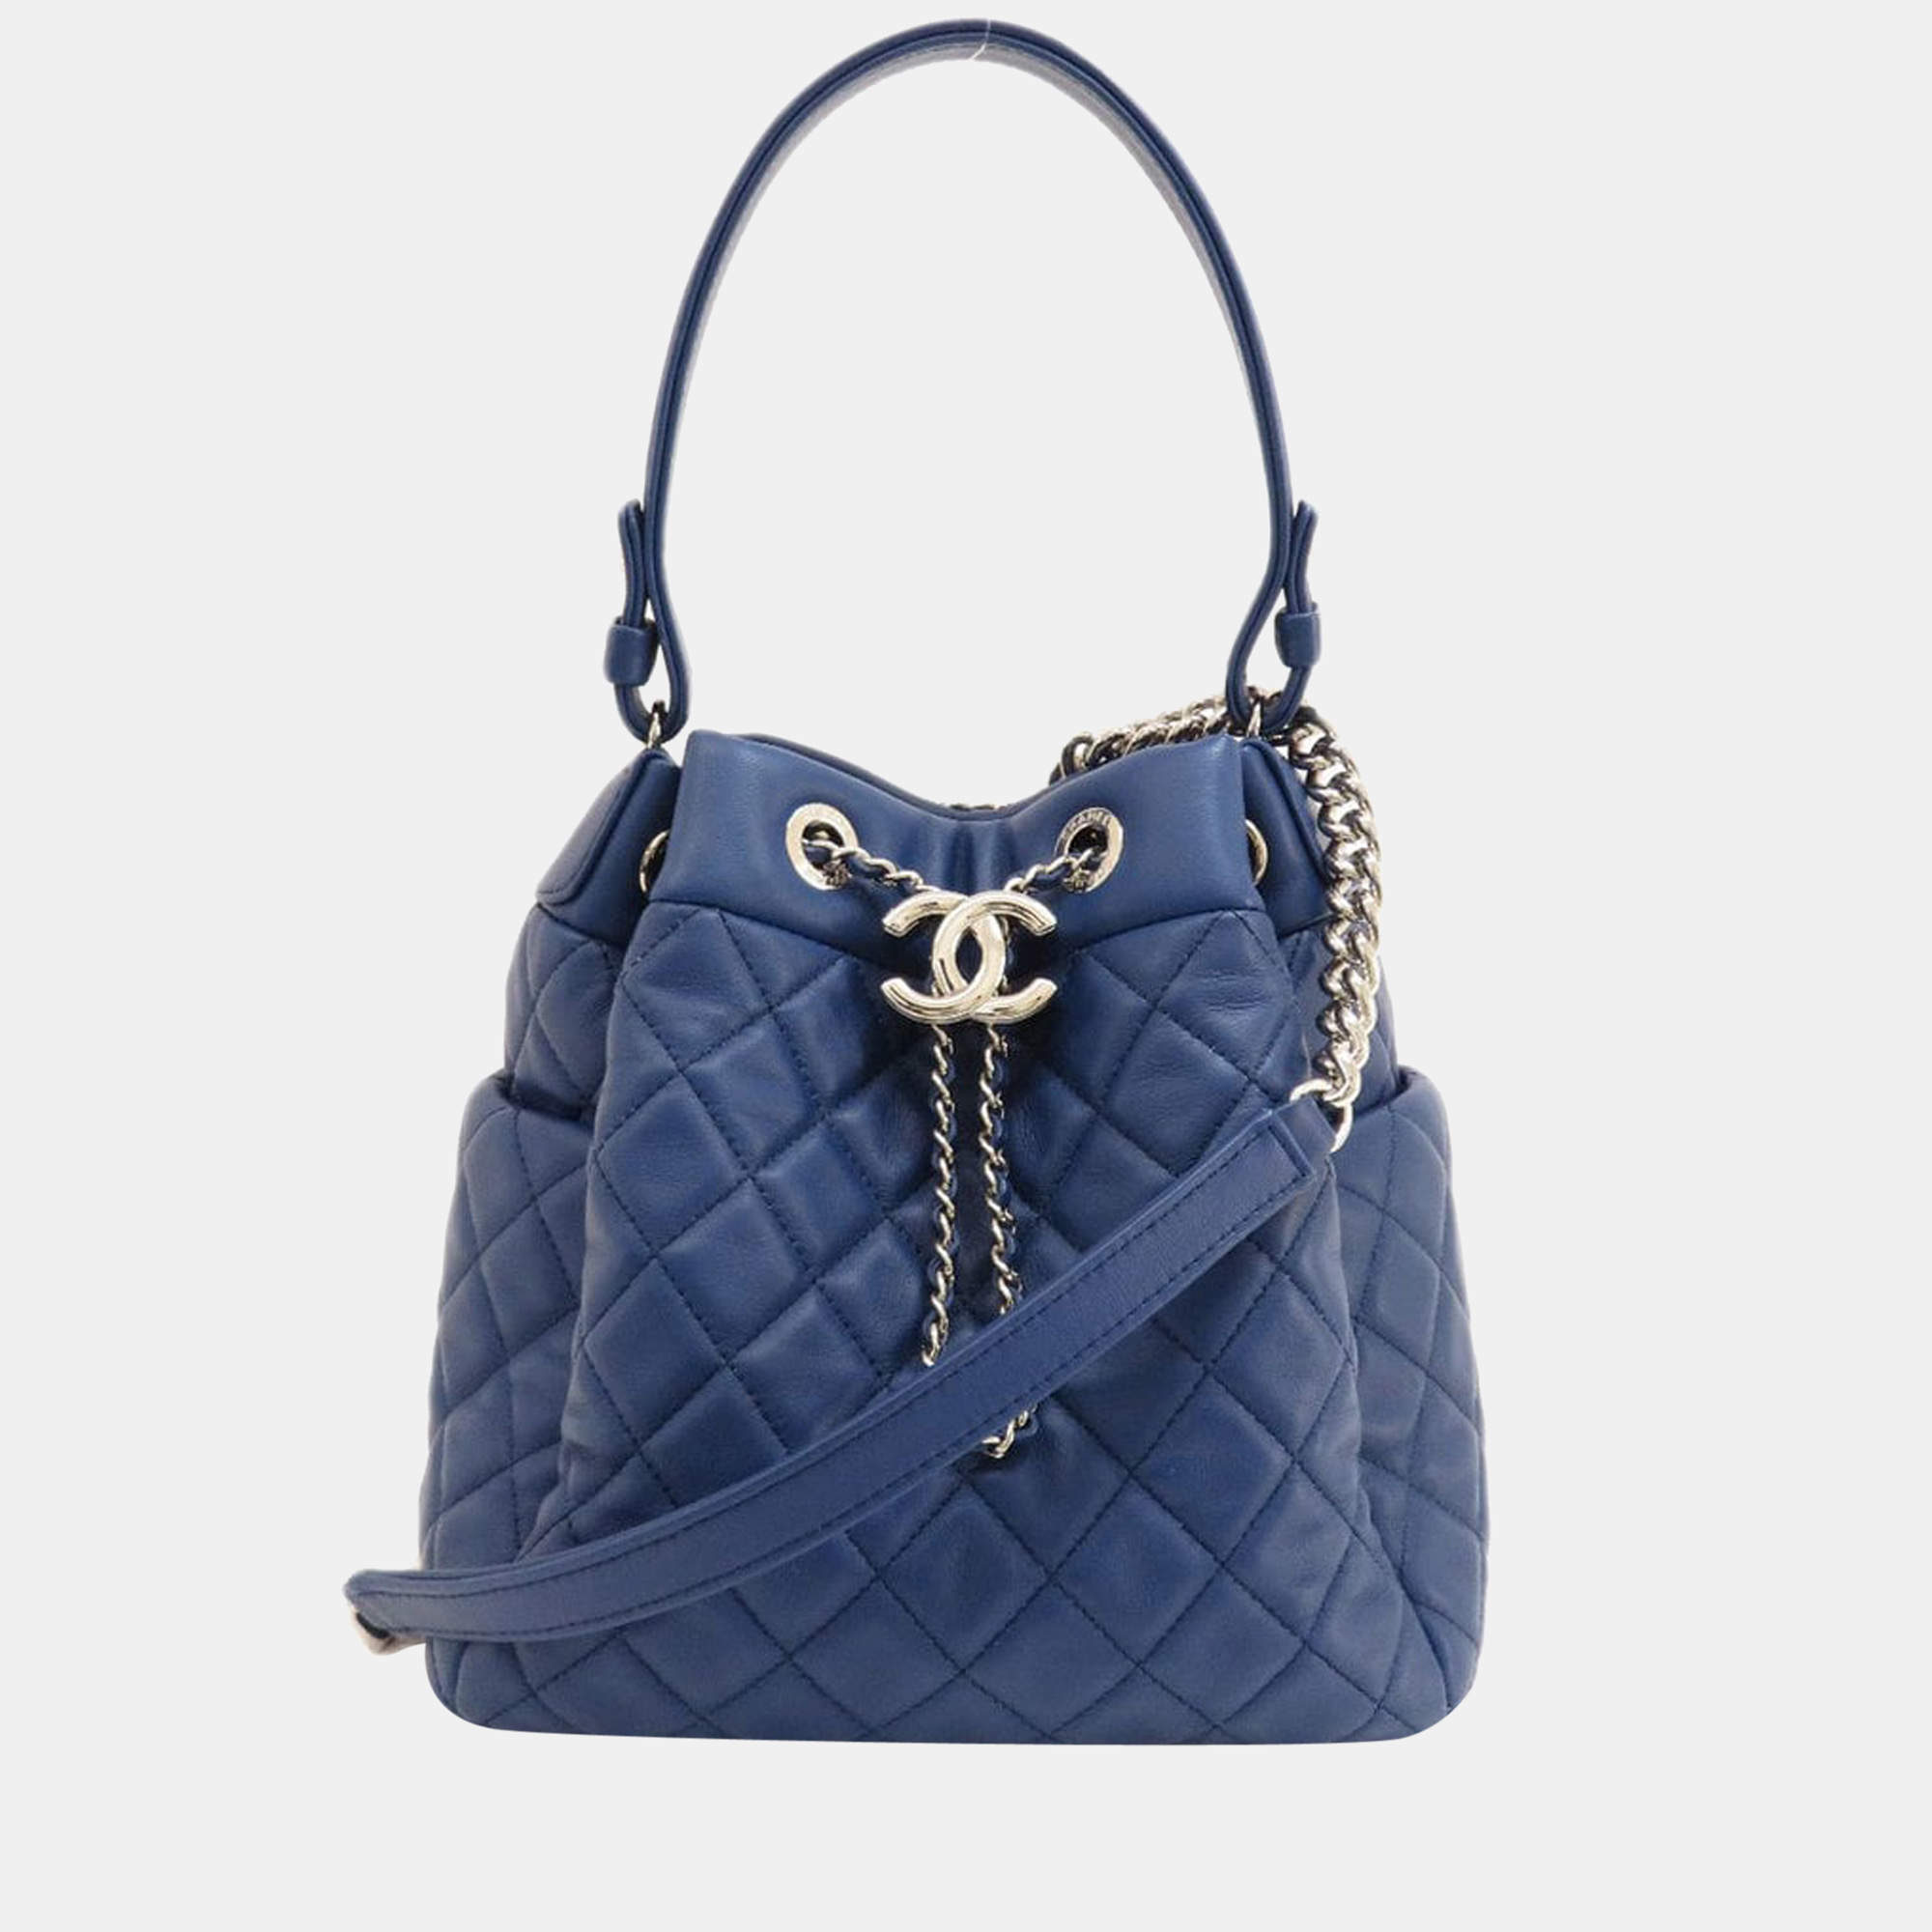 CHANEL Bucket & Drawstring Bags for Women, Authenticity Guaranteed